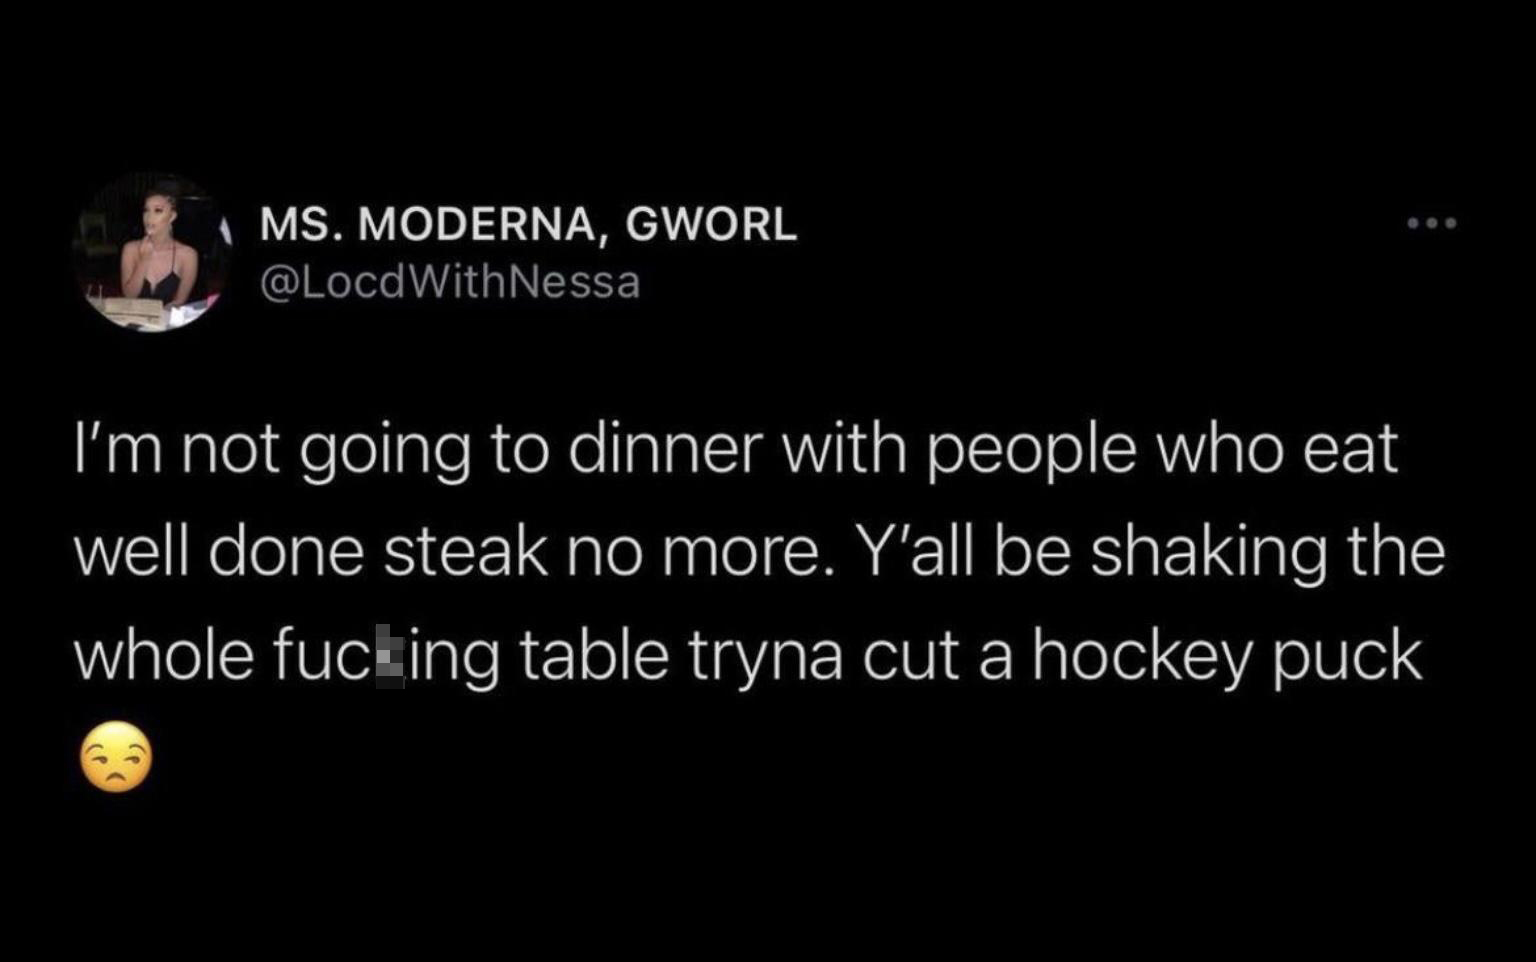 funny tweets - bad twitter quotes - Ms. Moderna, Gworl I'm not going to dinner with people who eat well done steak no more. Y'all be shaking the whole fucking table tryna cut a hockey puck